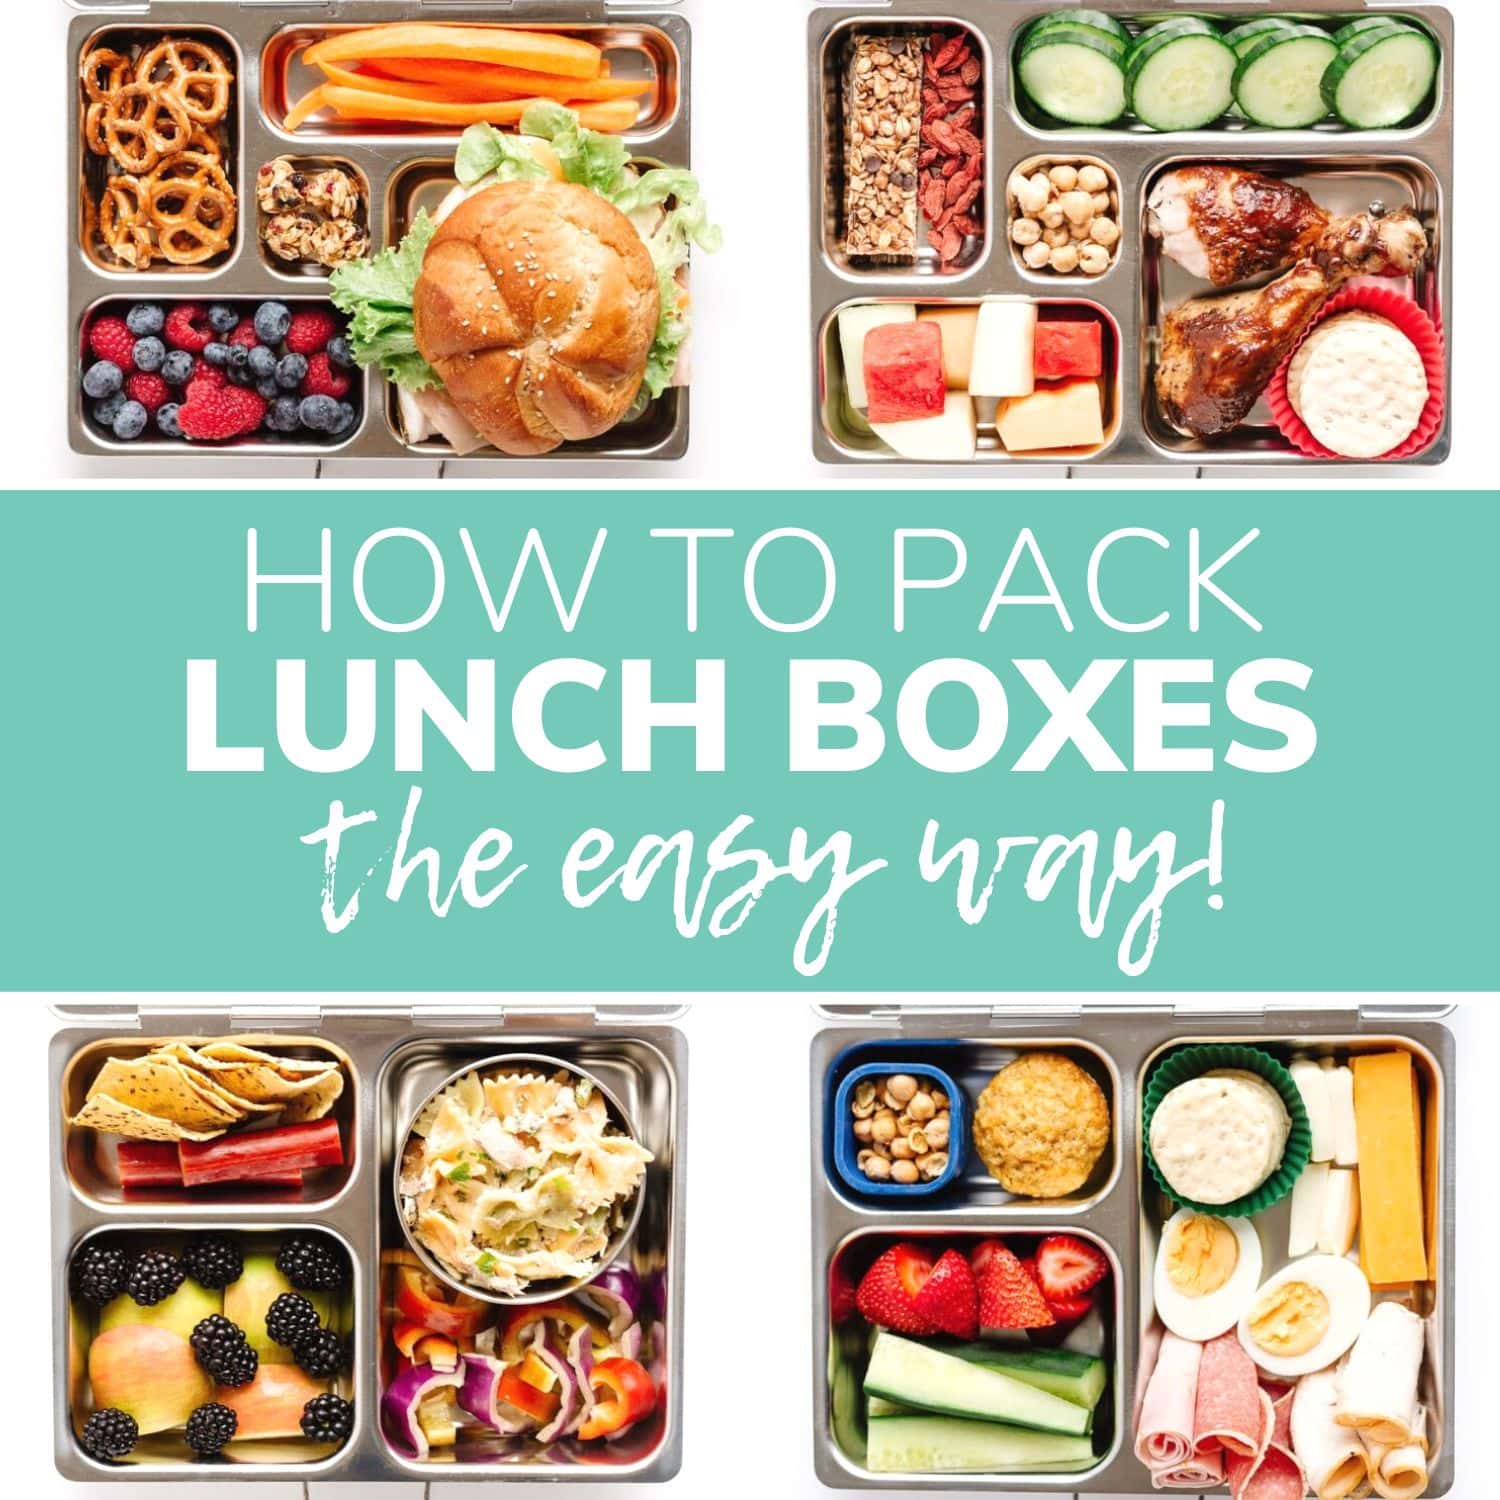 https://www.mapleandmango.com/wp-content/uploads/2022/08/how-to-pack-lunch-boxes-easy-way-feature.jpg